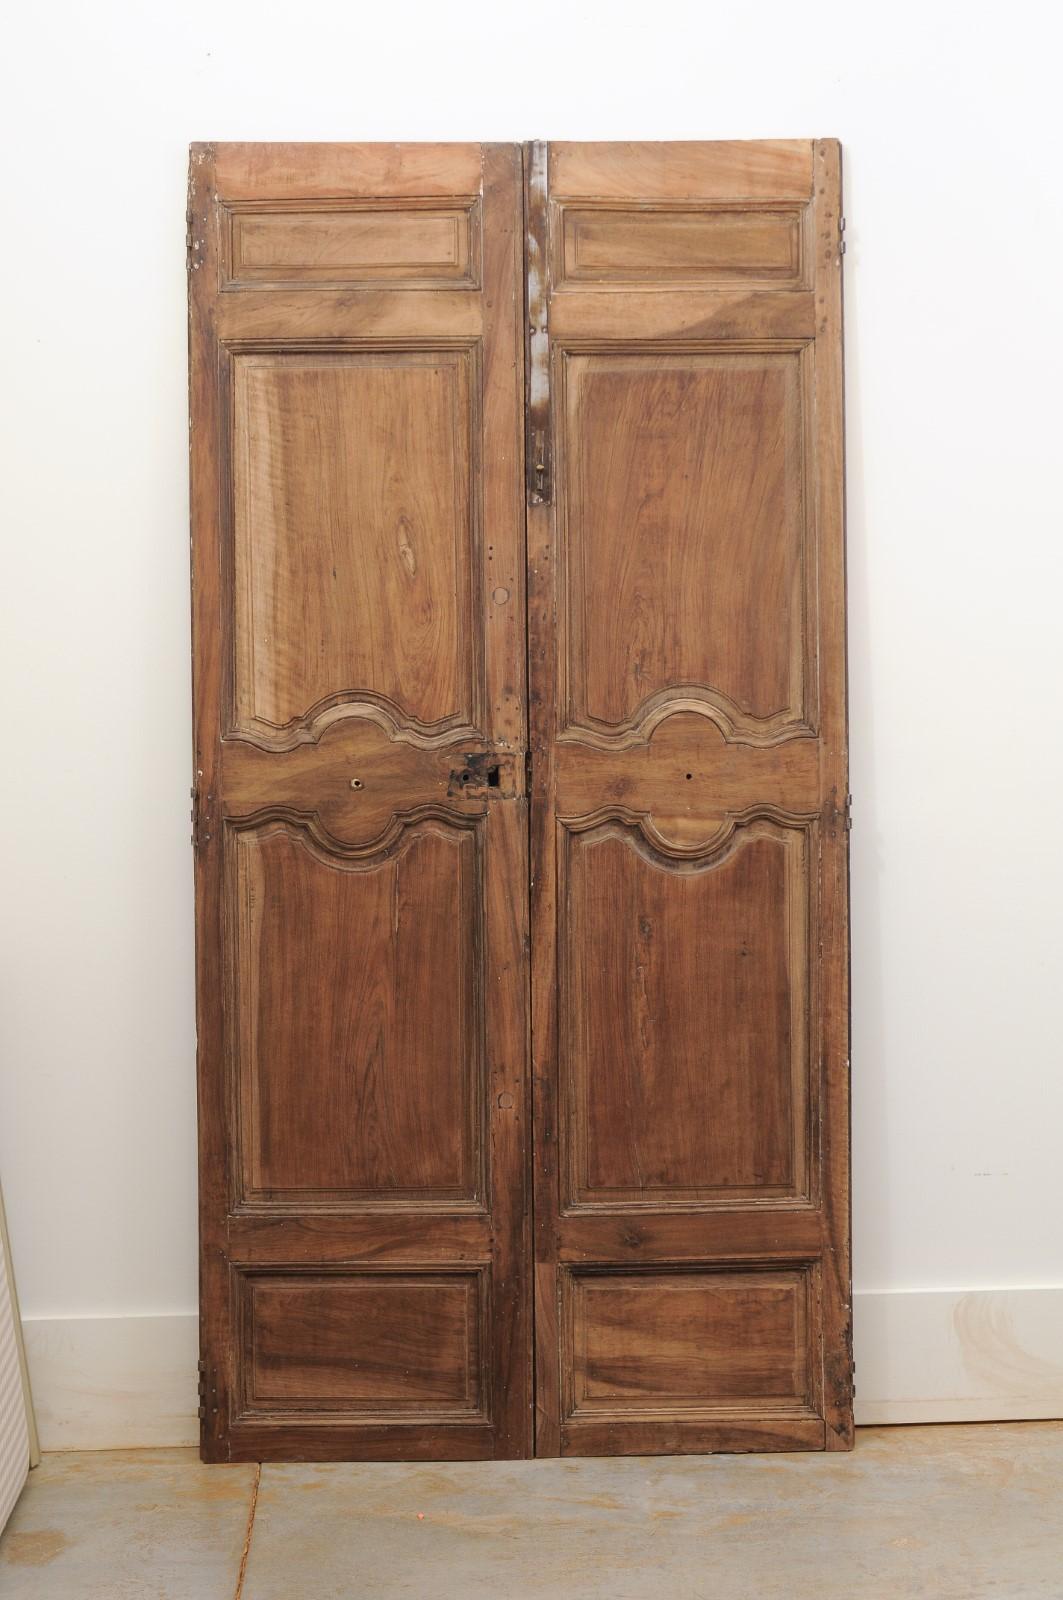 A pair of French walnut doors from the 18th century, with molded panels. Crafted in France from walnut during the 18th century, these double doors will make for an excellent architectural addition to any home decor. Their tall linear silhouettes are